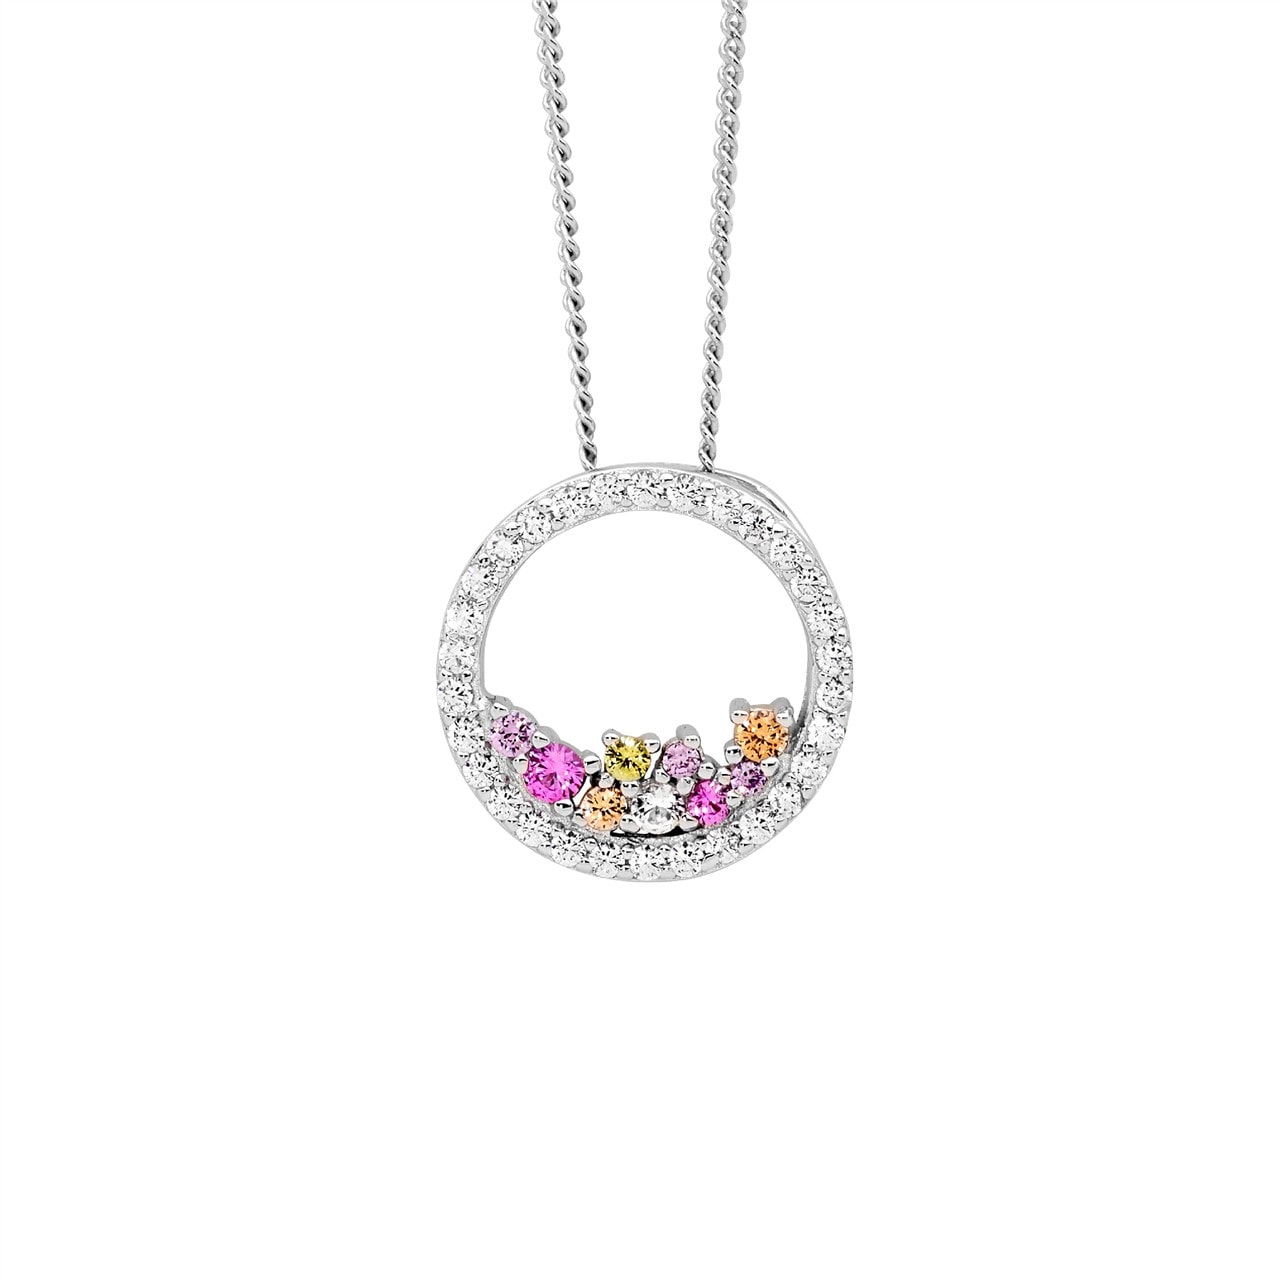 Silver White CZ Open Circle Pendant w/ Scattered Pastel Coloured CZ_0